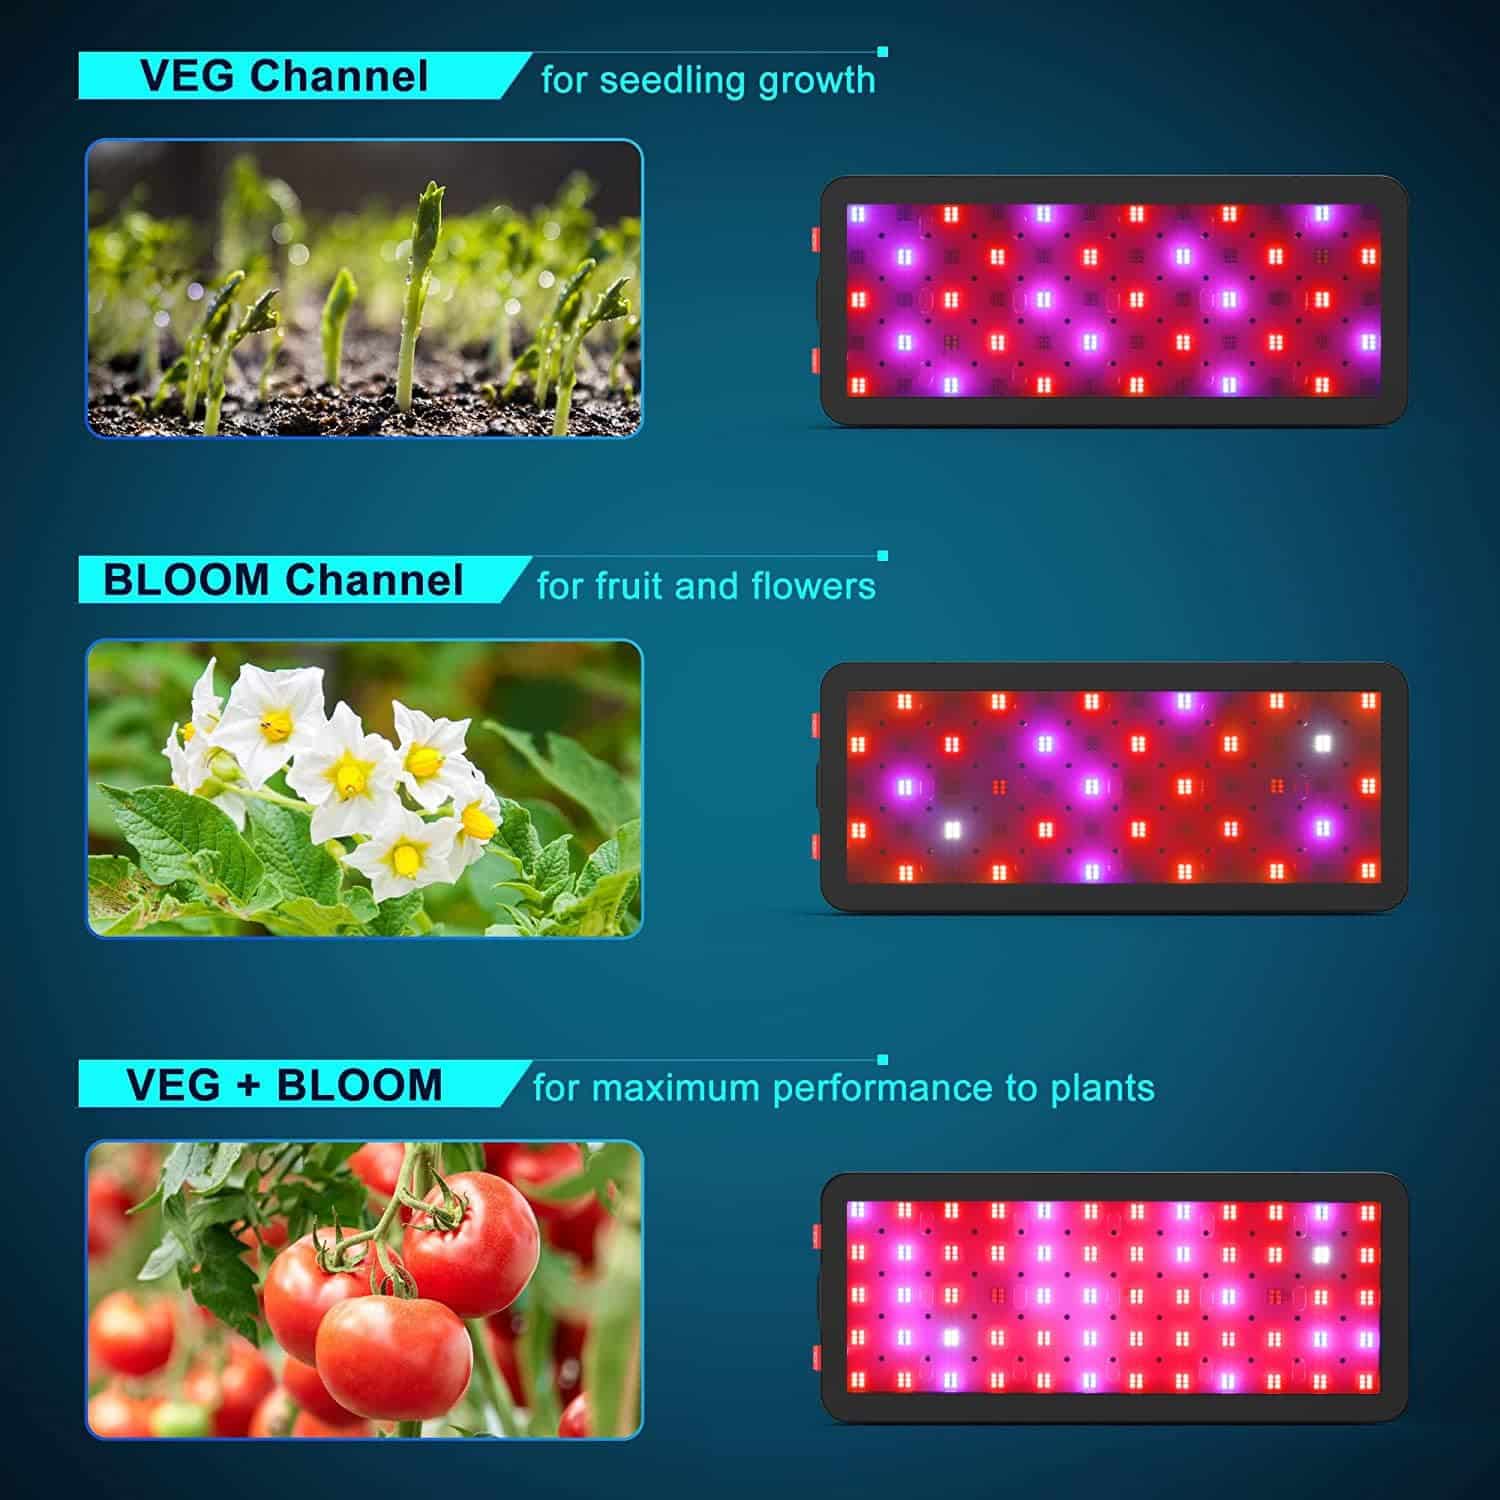 Phlizon Upgraded 600W LED Plant Grow Light with SMD LEDs Full Spectrum Plants Light Double Switch Grow Led for Indoor Plants Veg and Flower- 600W (600W)